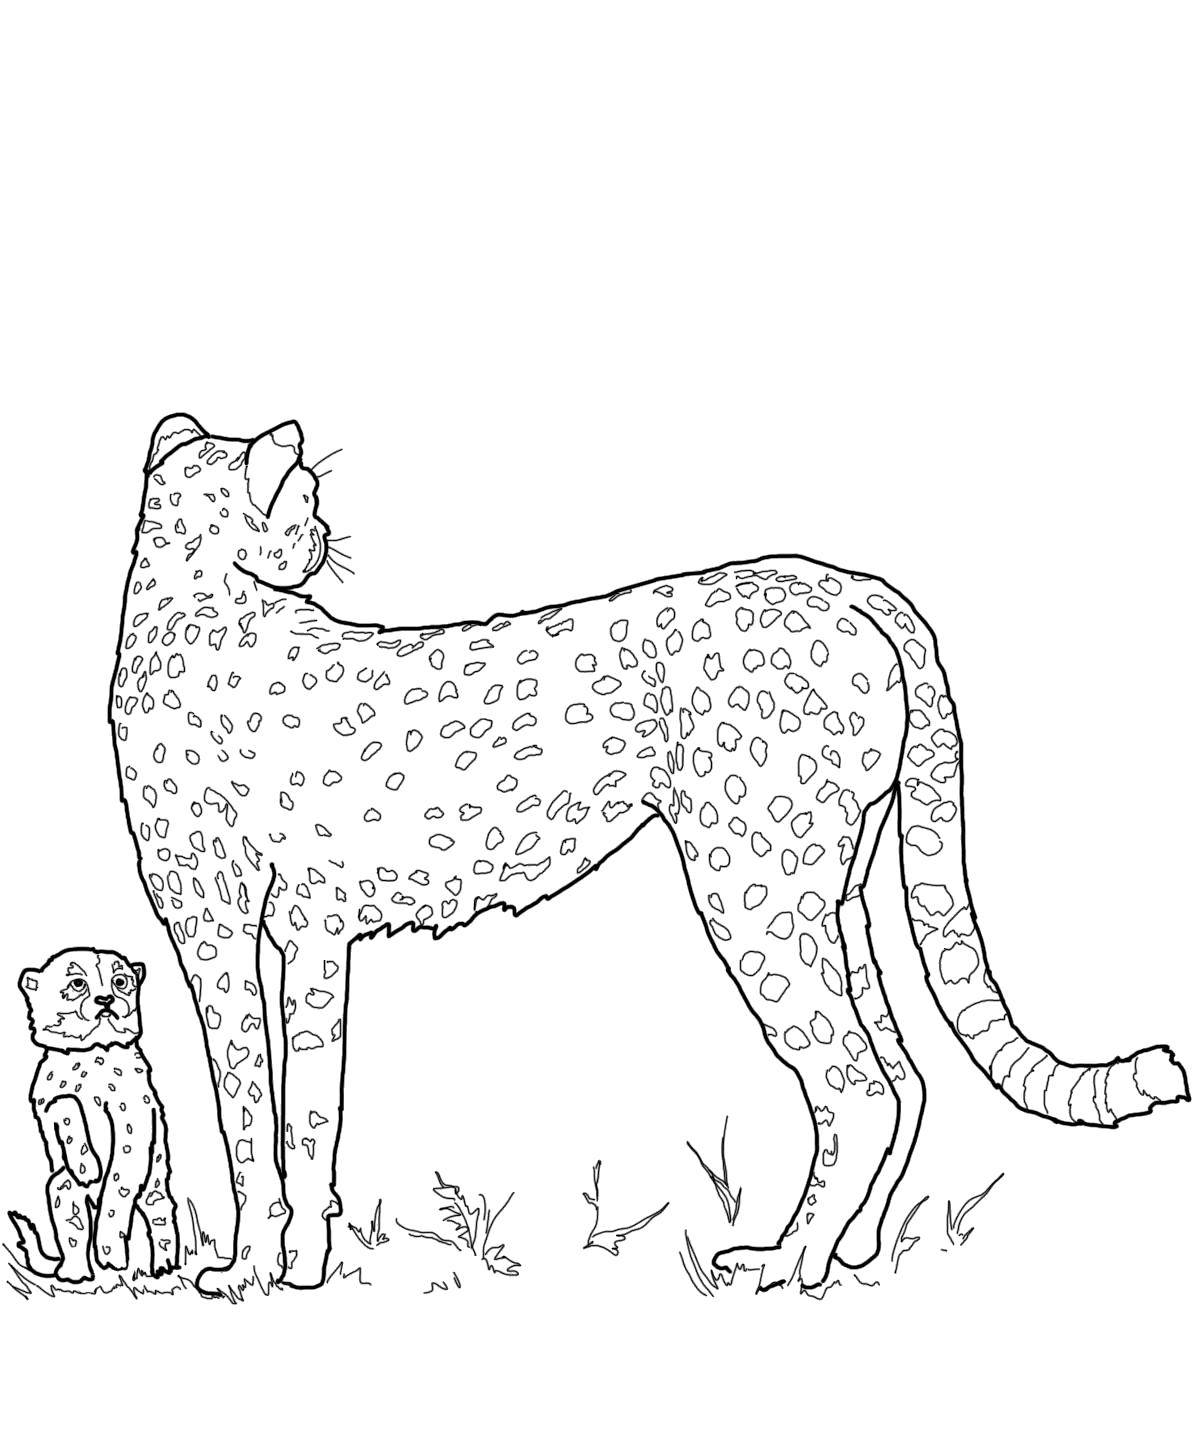 Coloring Mother Cheetah with cub. Category family animals. Tags:  Family, parents, children.